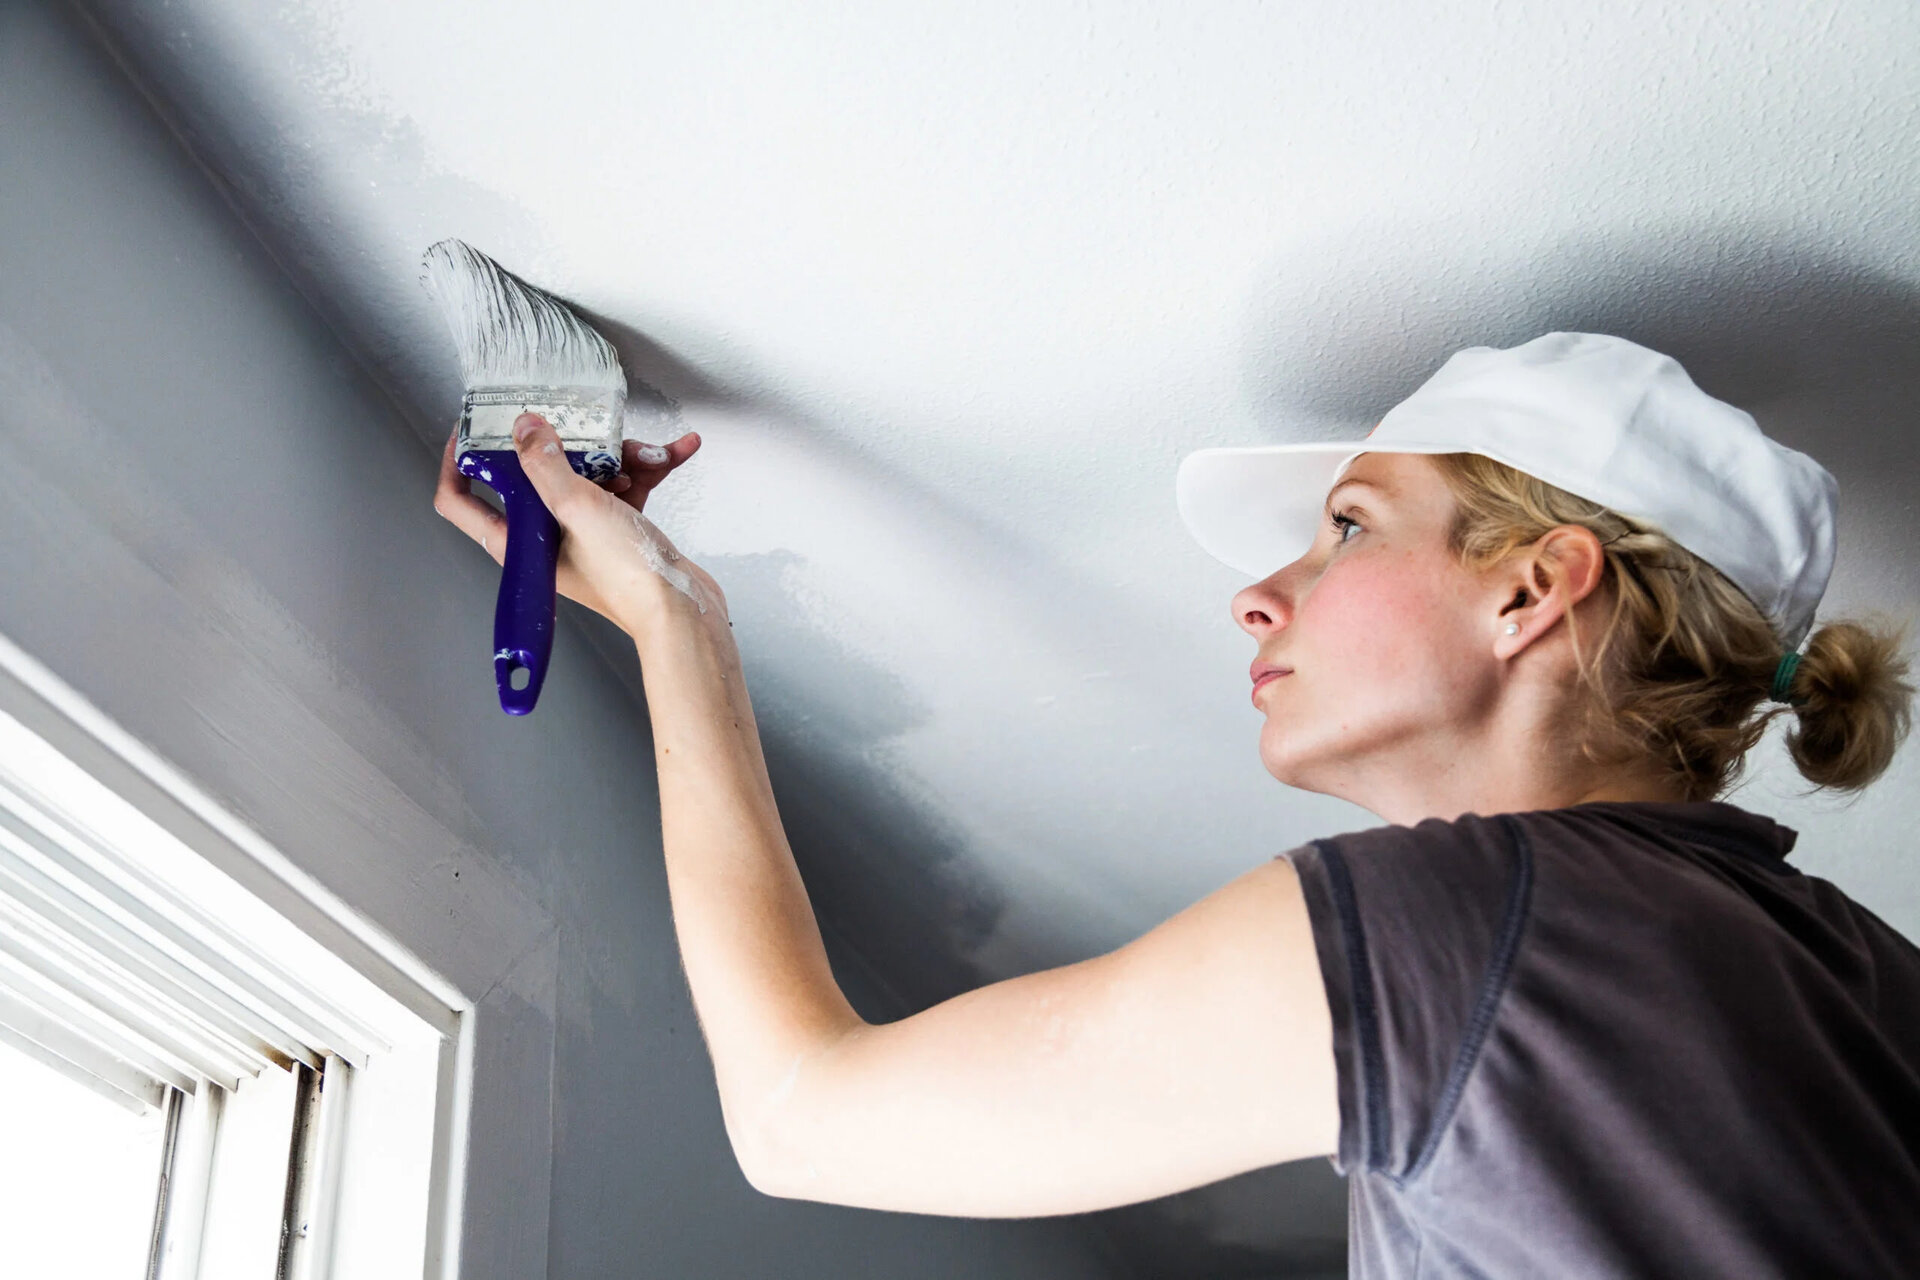 Ceiling Painting Mistakes: Errors Experts Urge You To Avoid